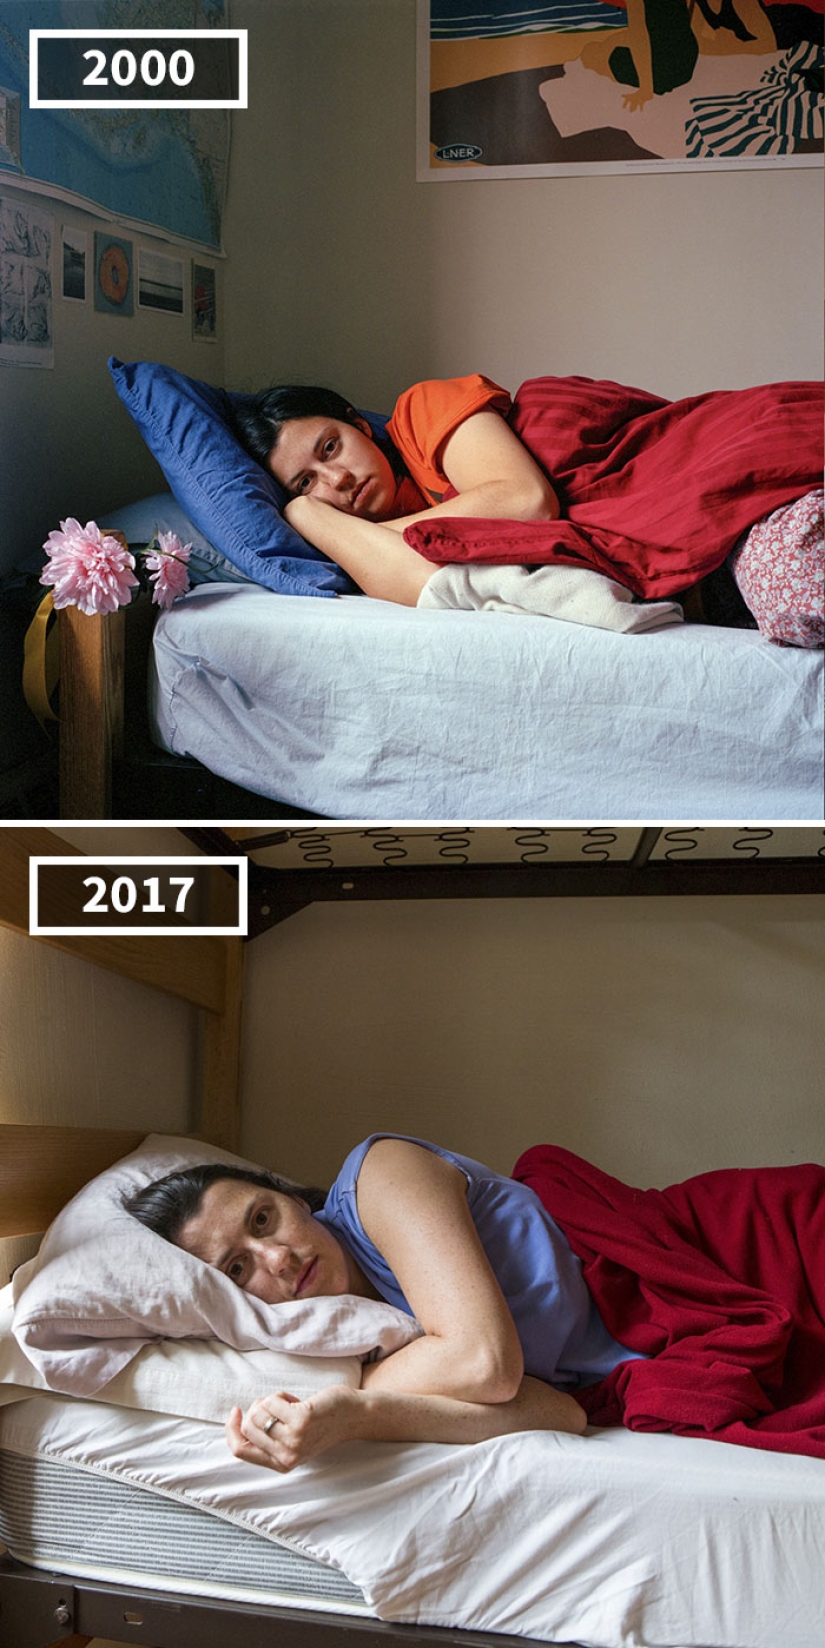 17 years later: the photographer uses the example of friends to show how people grow up in different ways